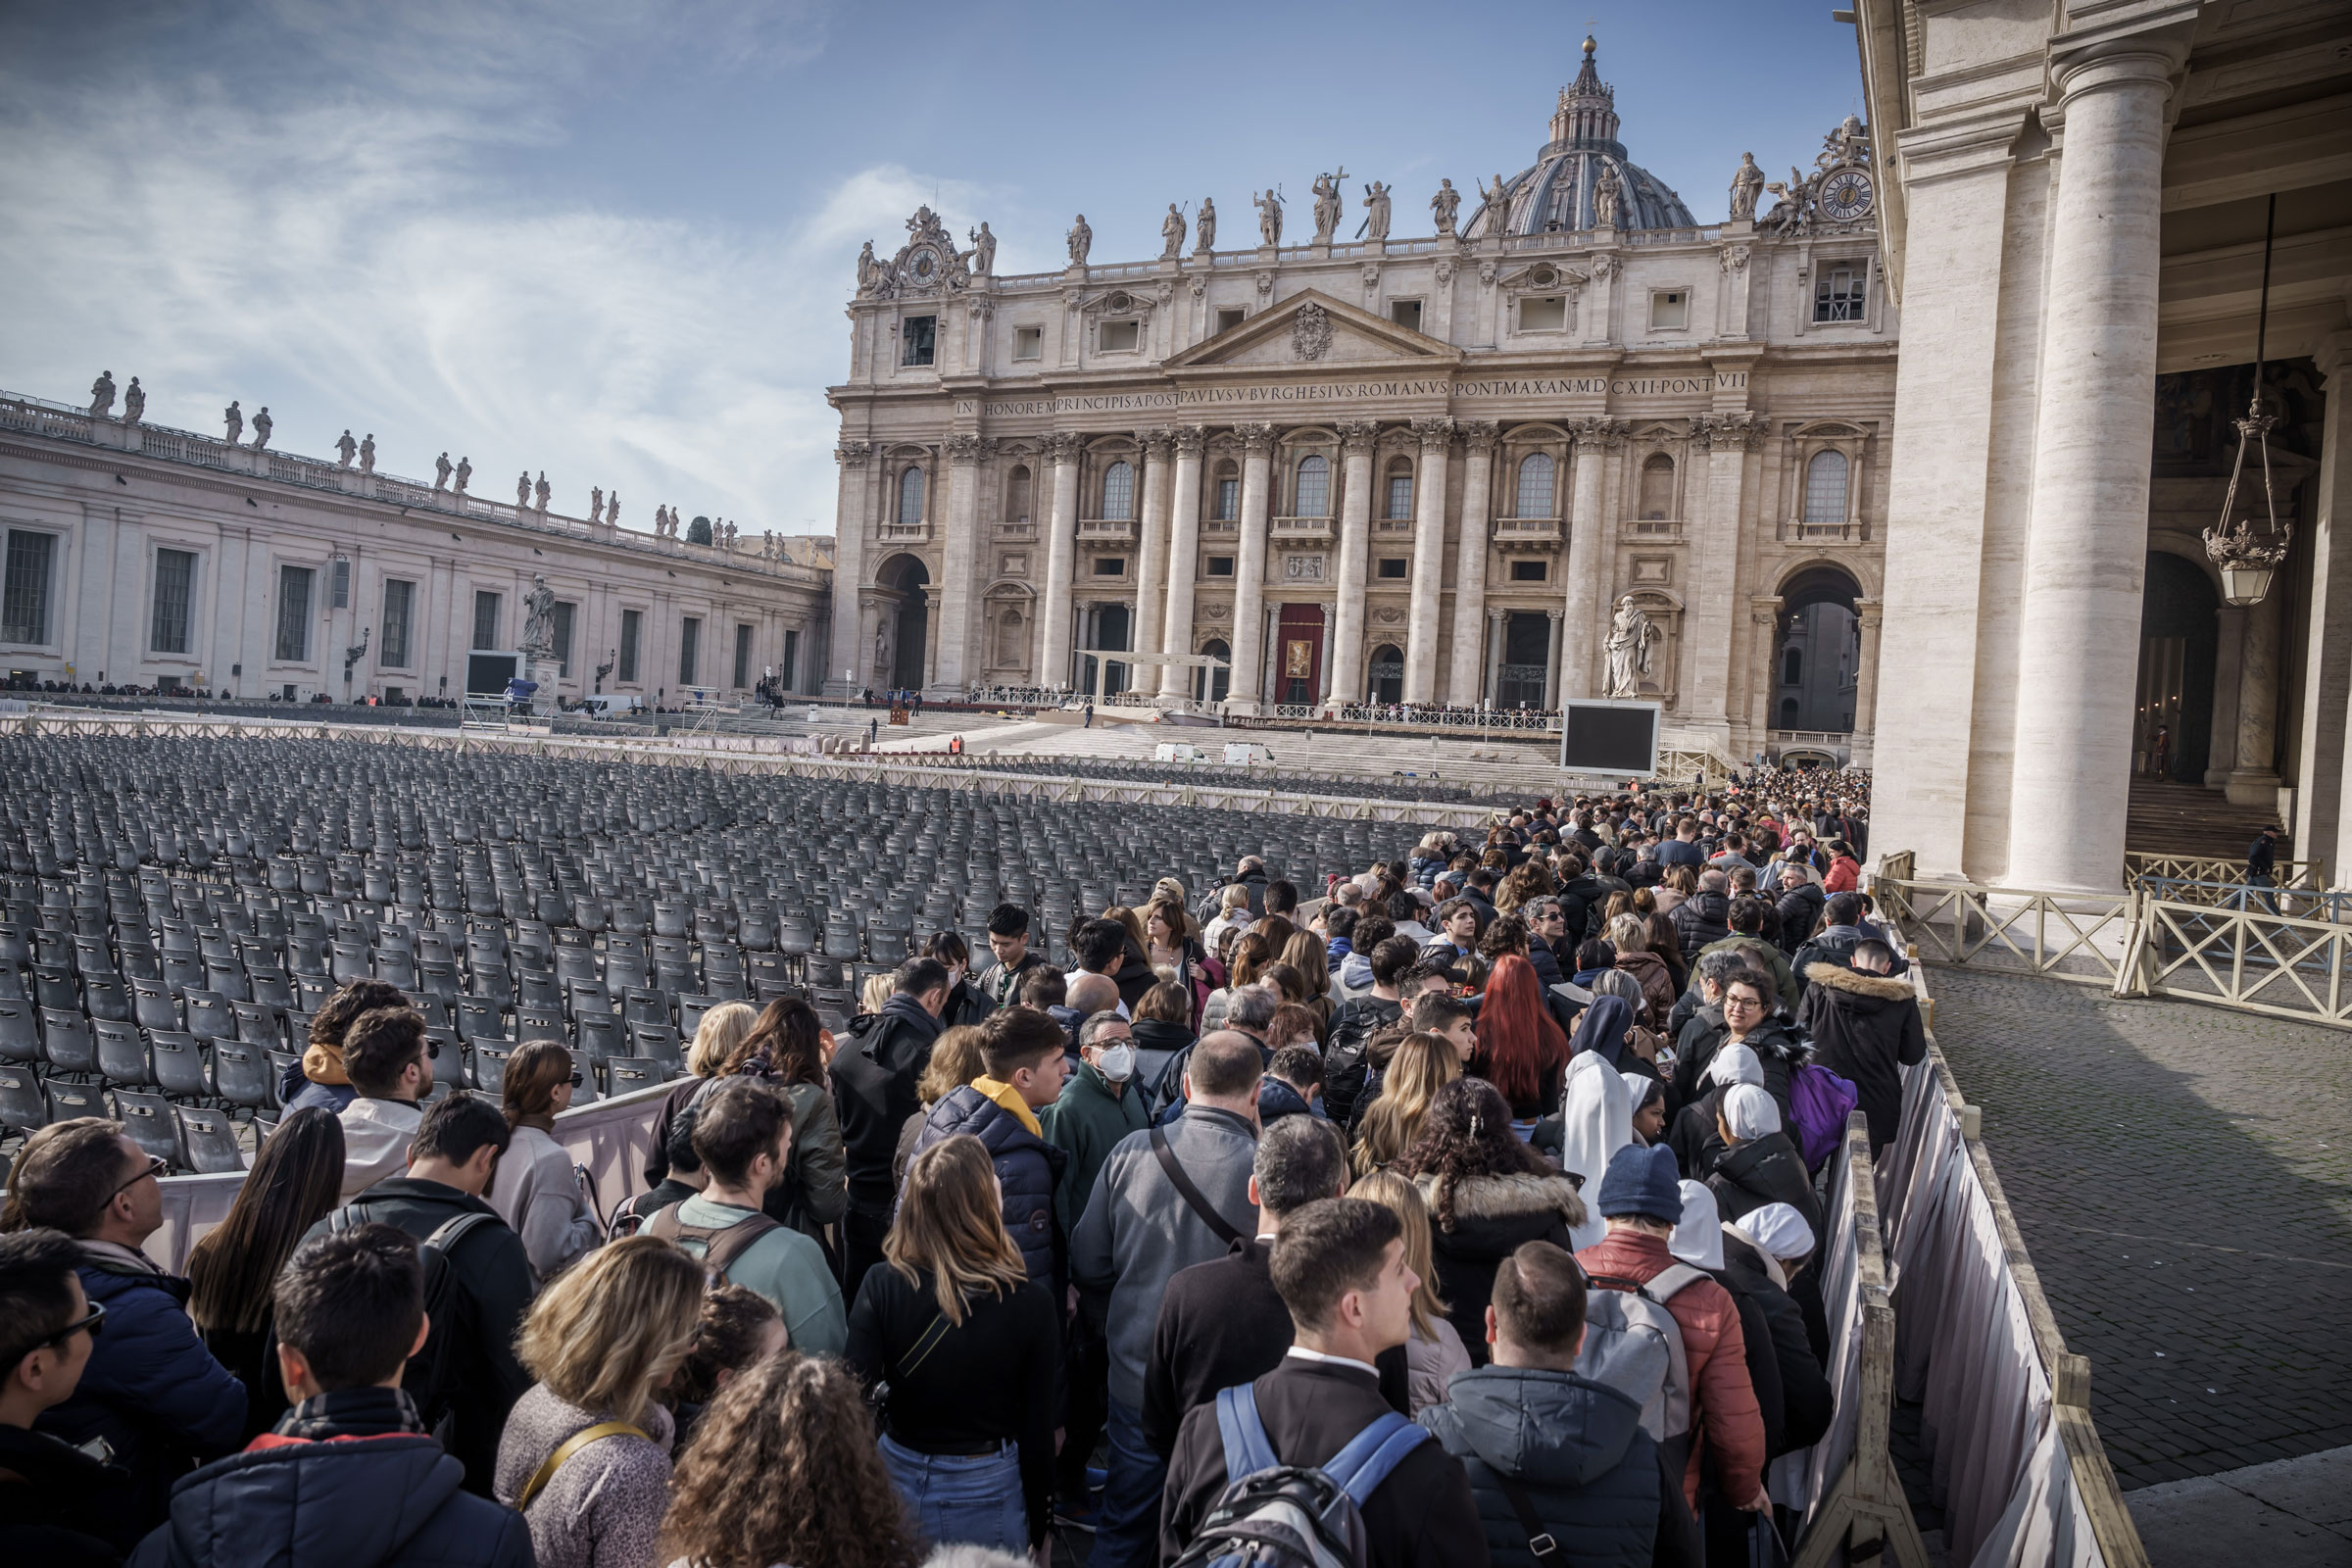 Faithful stand in St. Peter’s Square to bid farewell to the body of the late Pope Emeritus Benedict XVI, who is laid out in public in St. Peter’s Basilica, on Jan. 4, 2023.